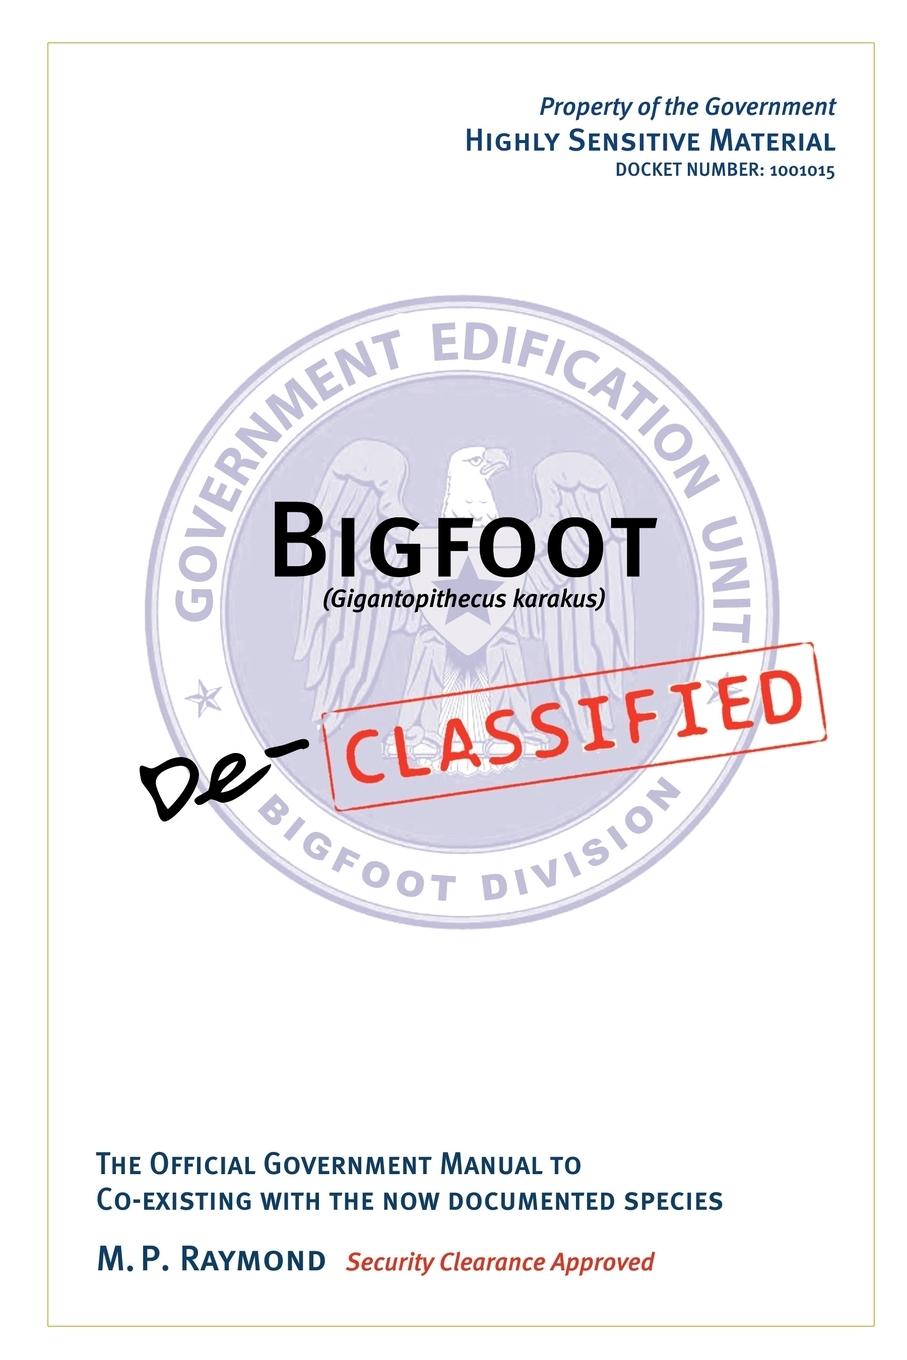 Bigfoot Declassified / The official government manual for co-existing with the now documented species / M. P. Raymond / Taschenbuch / Paperback / Englisch / 2009 / iUniverse / EAN 9781440122187 - Raymond, M. P.